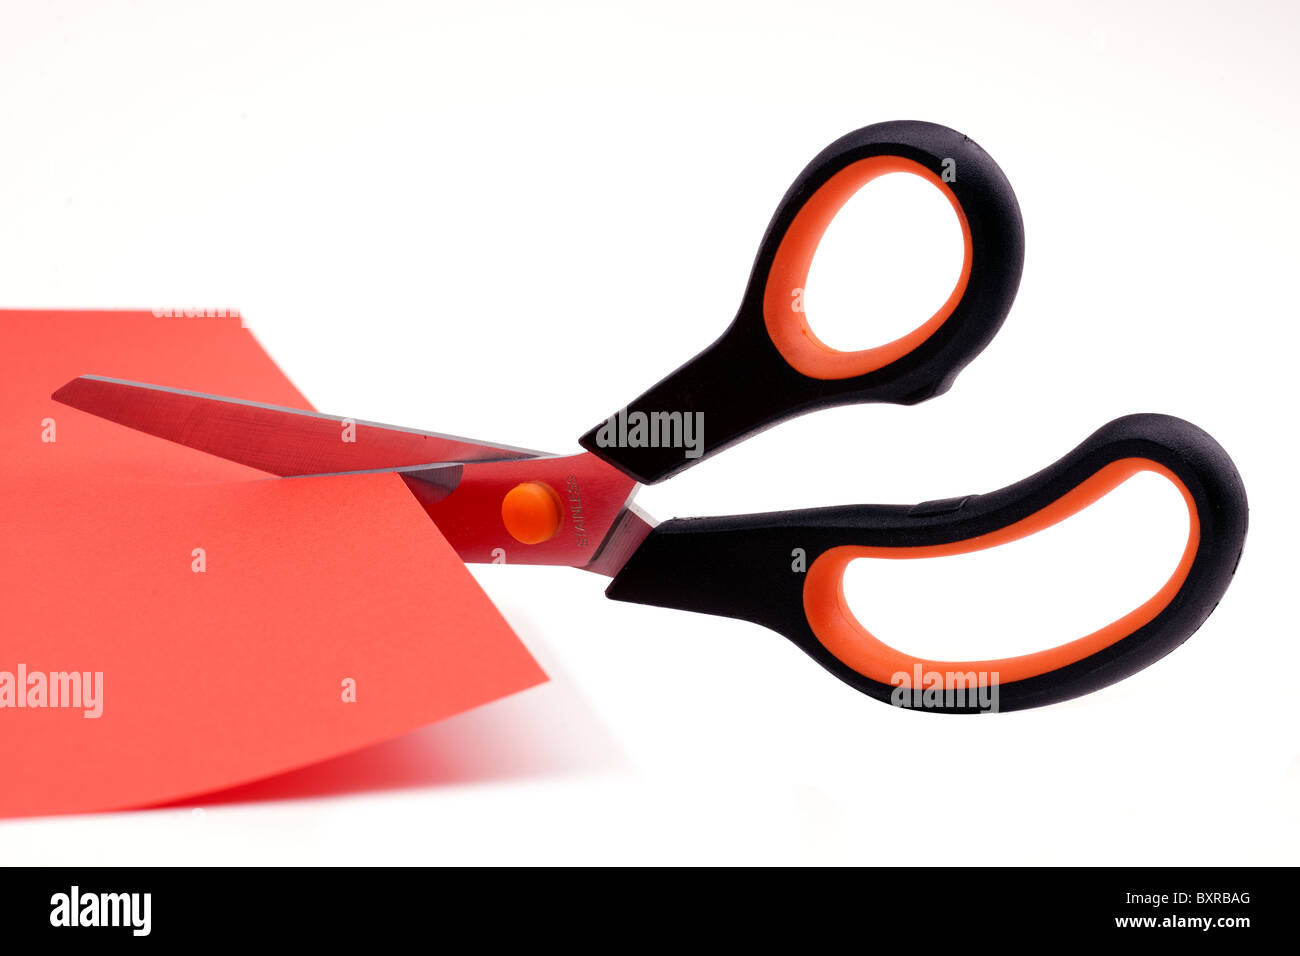 Scissors cutting through a sheet of red paper Stock Photo